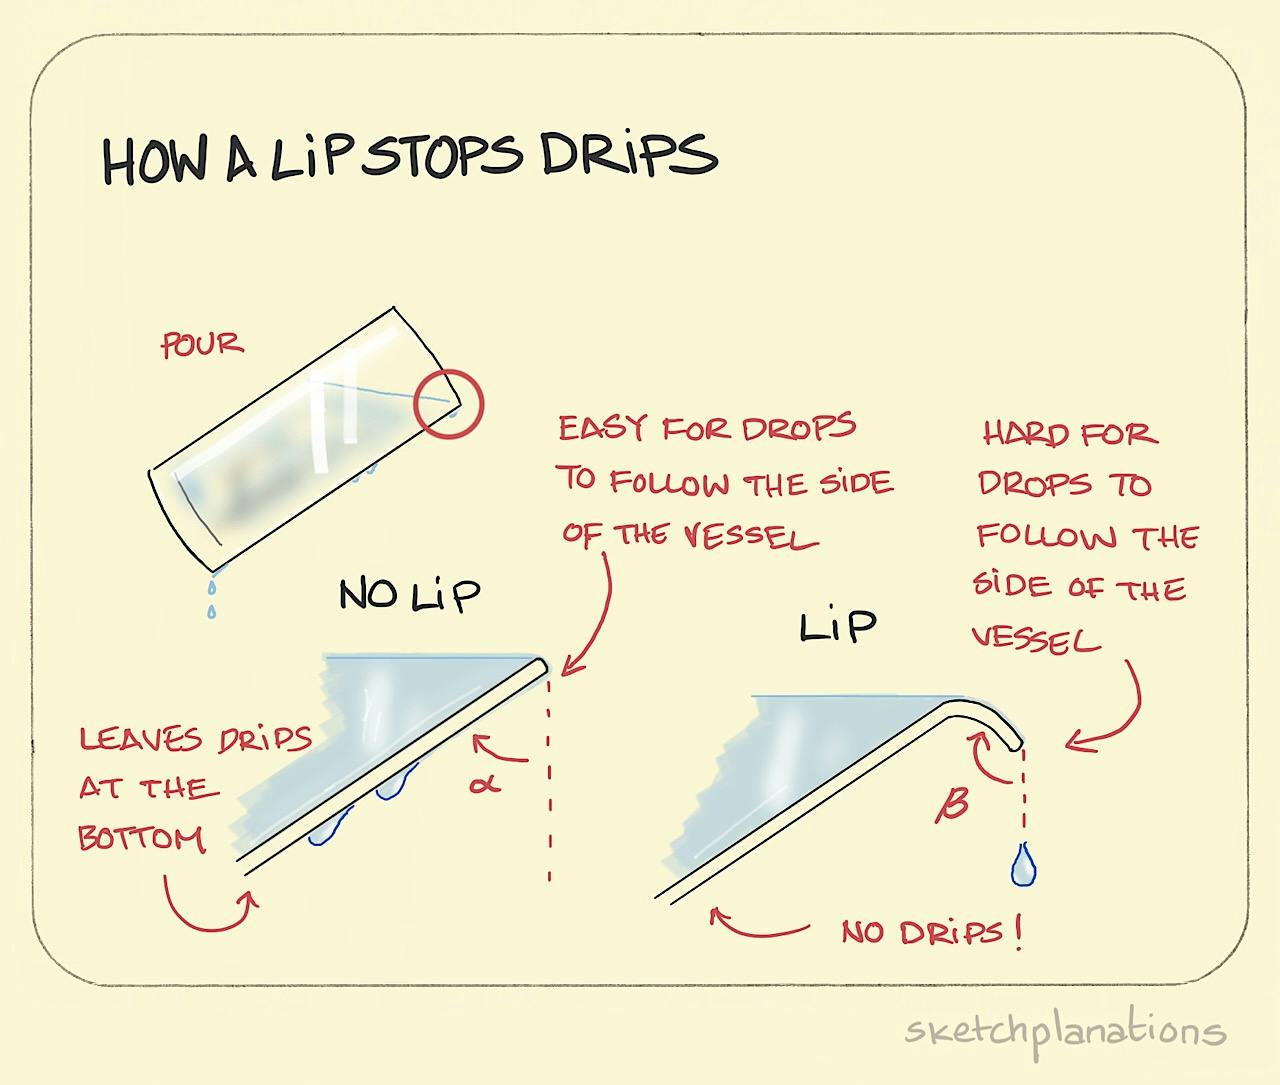 How a lip stops drips illustration: a glass of water is tipped up to pour out its contents. Close-ups of the mouth of the glass show how without a lip, water trickles down the side of the glass and that with a lip the side of the glass stays dry. 